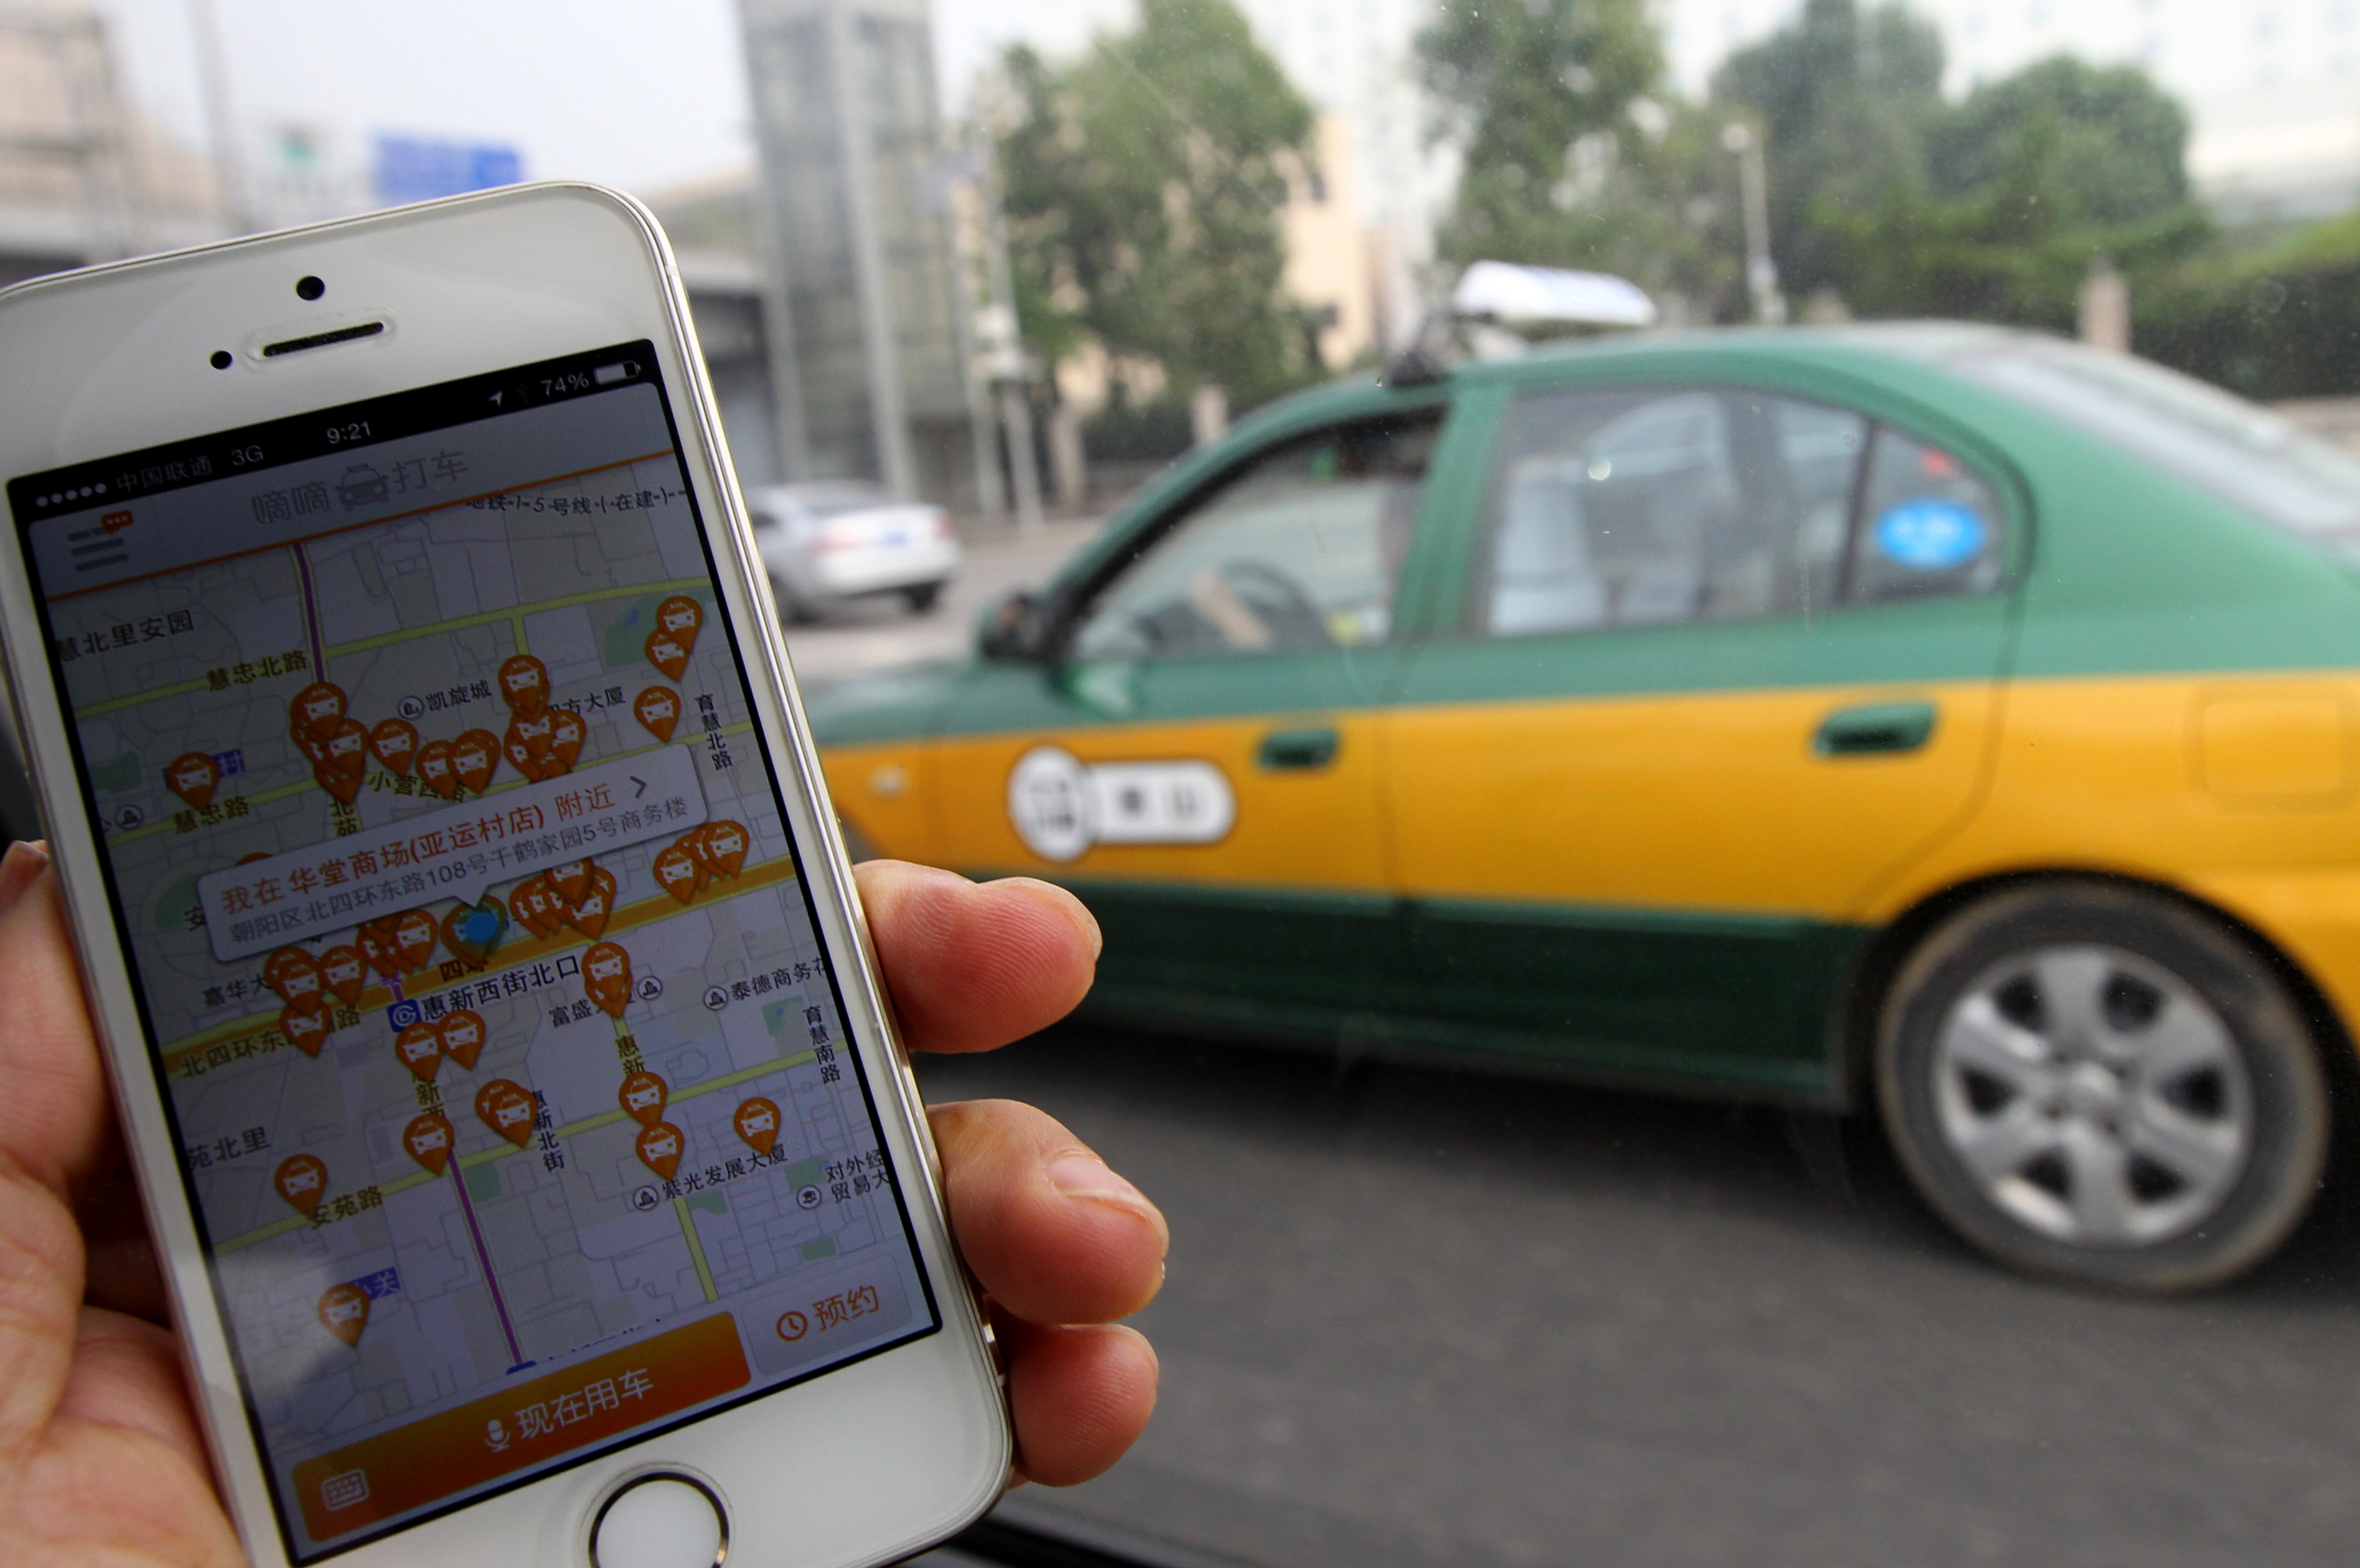 Domestic car-hailing services have now come under the scrutiny of Chinese authorities following their actions against Uber. Photo: Simon Song